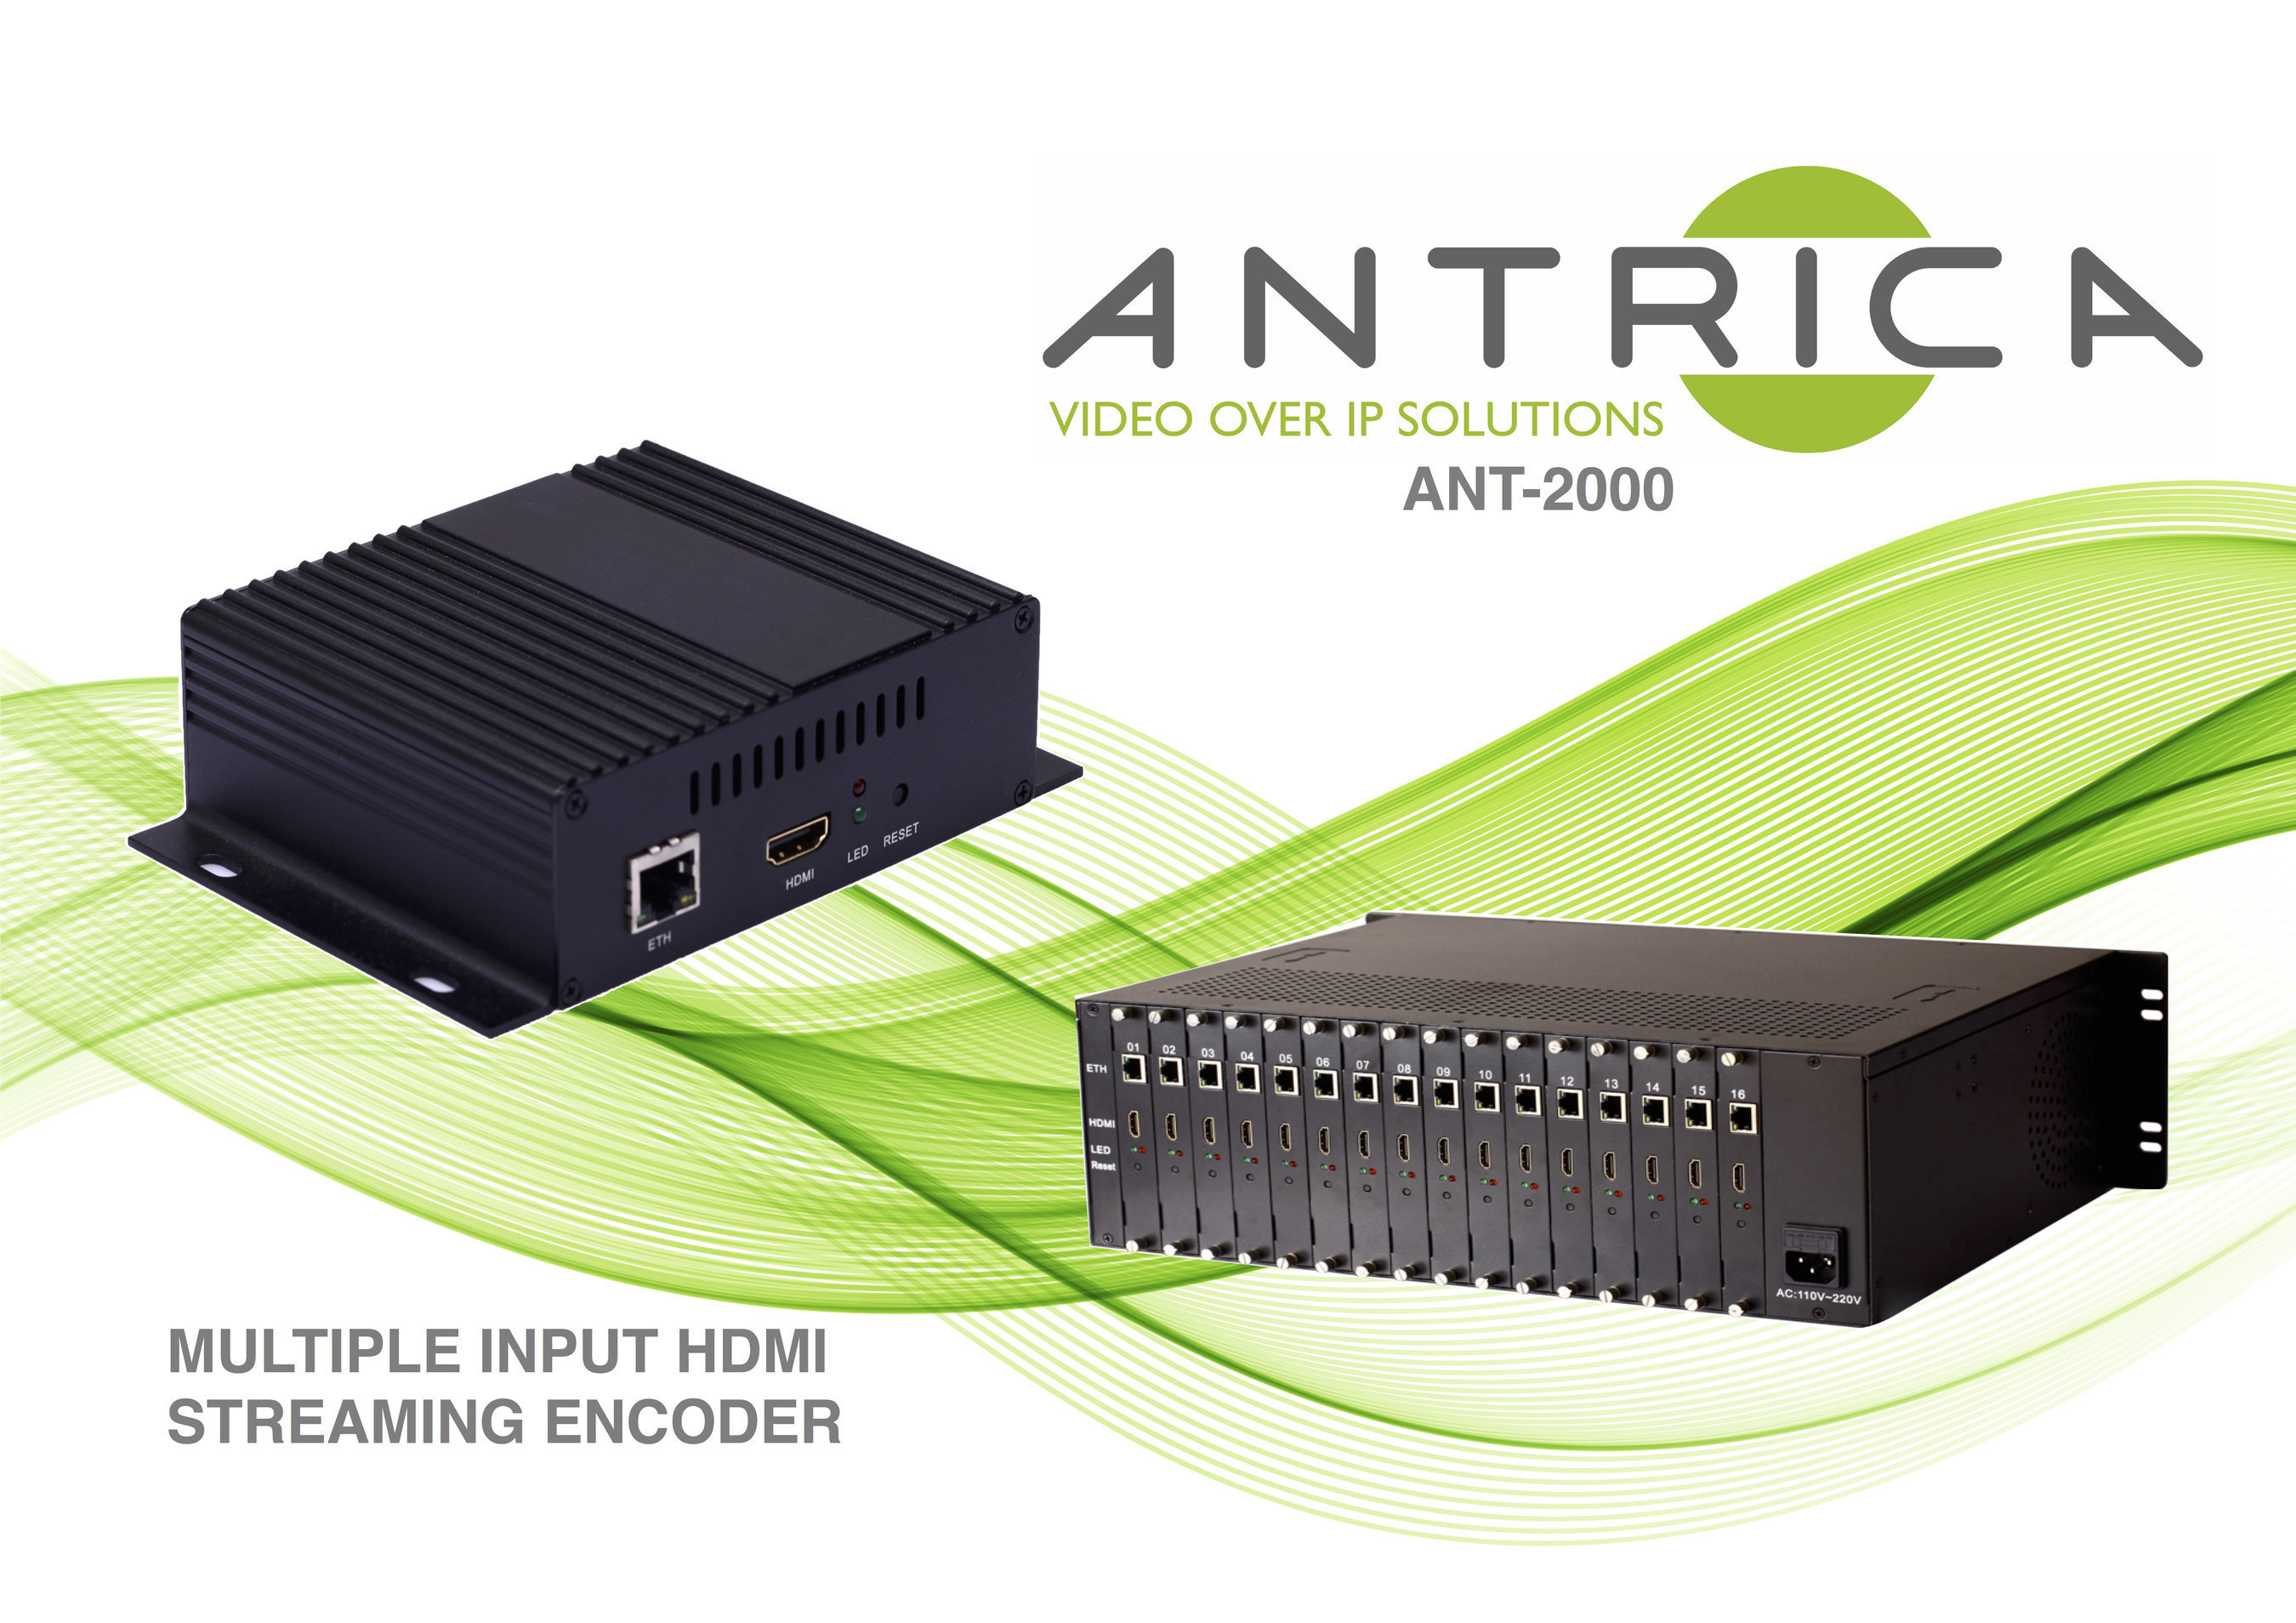 NEW MULTIPLE 1-100 CHANNEL 1080P60 HDMI VIDEO OVER IP ENCODER SOLUTION (PRNewsFoto/Antrica)